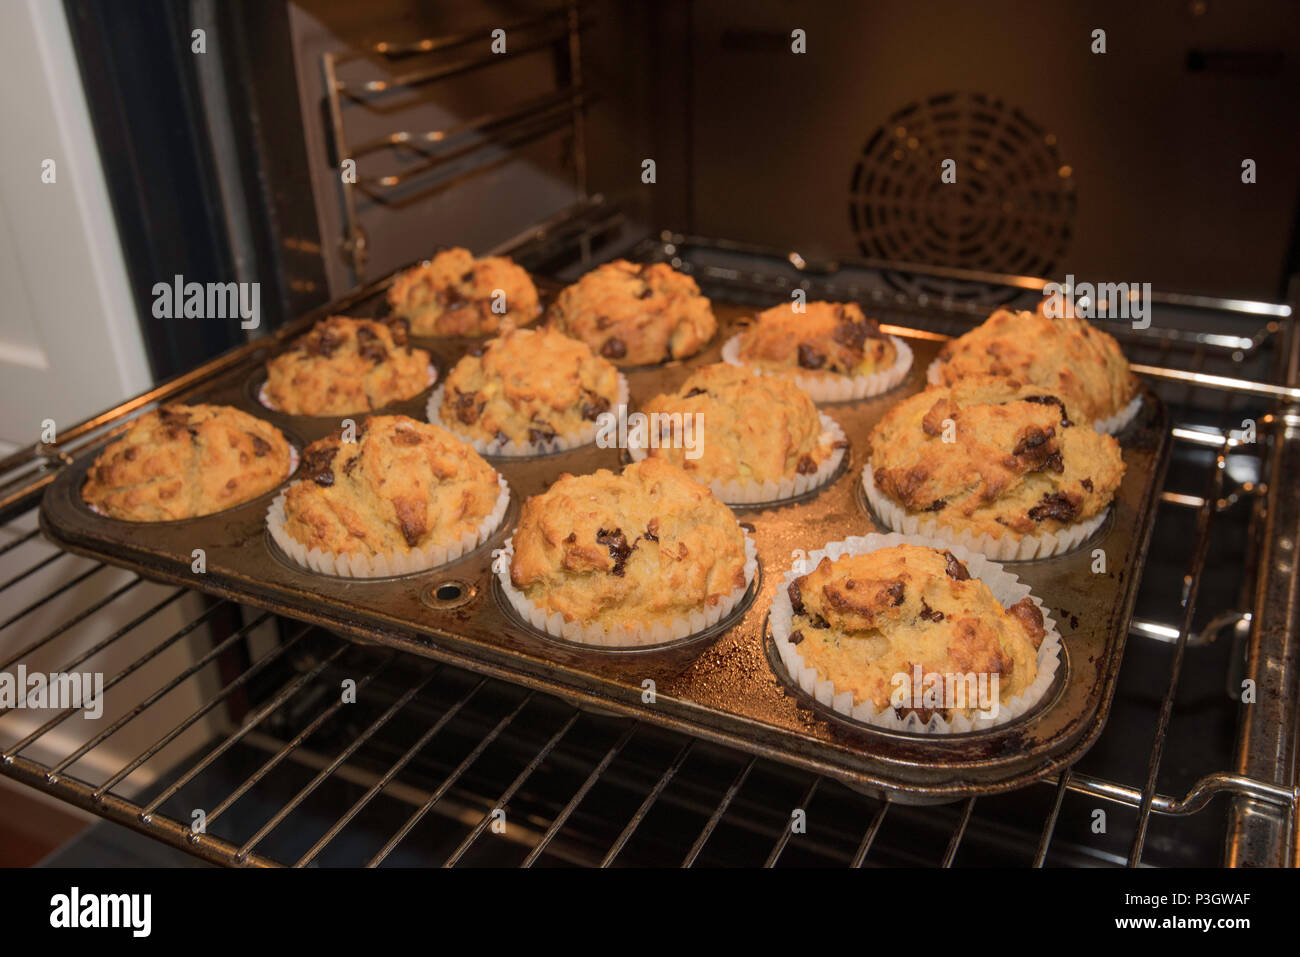 Home baked golden choc chip, banana and cereal muffins prepared in a kitchen in Sydney, Australia just out of the oven Stock Photo